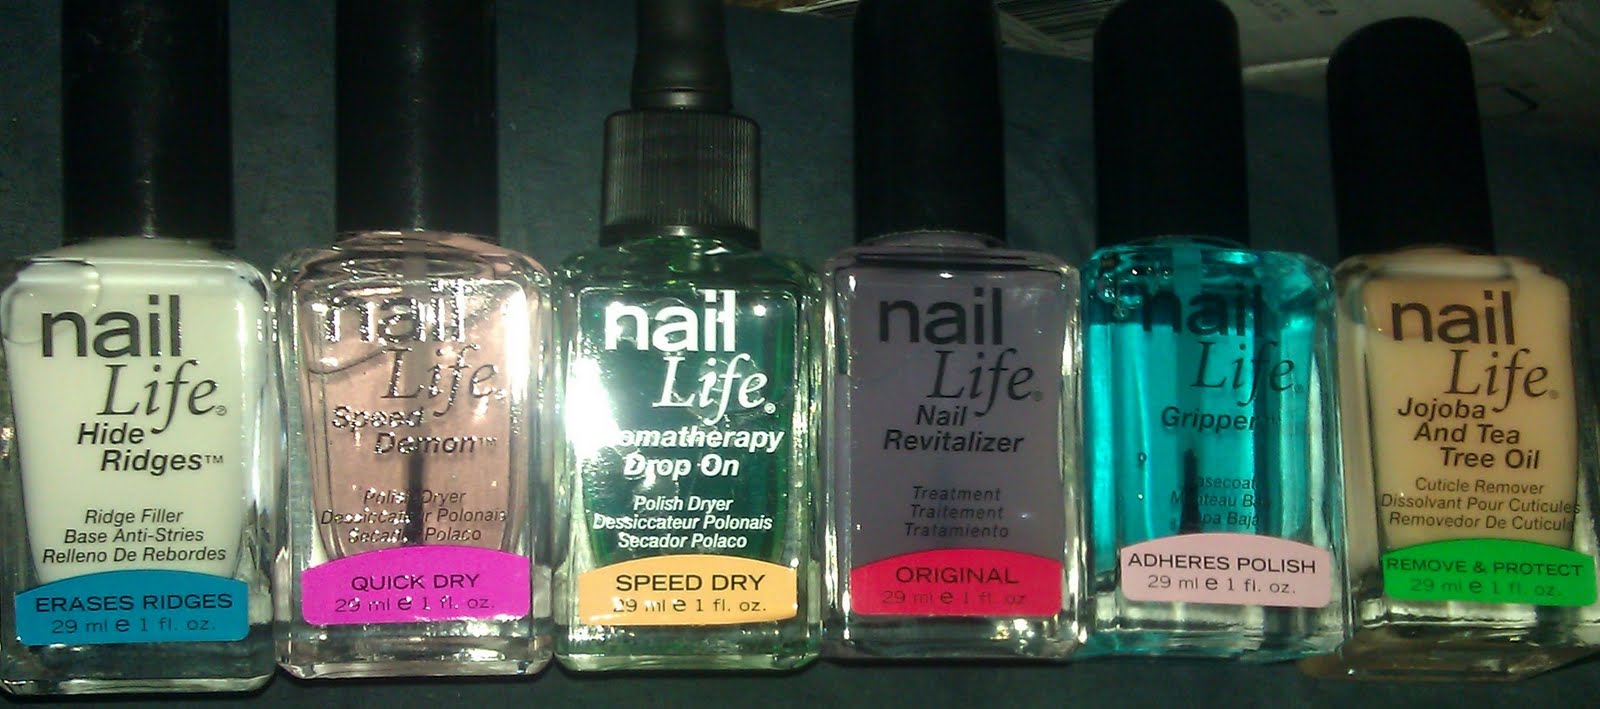 So Nail Life bran was formulated for Sally Beauty Co by FingerMates out of